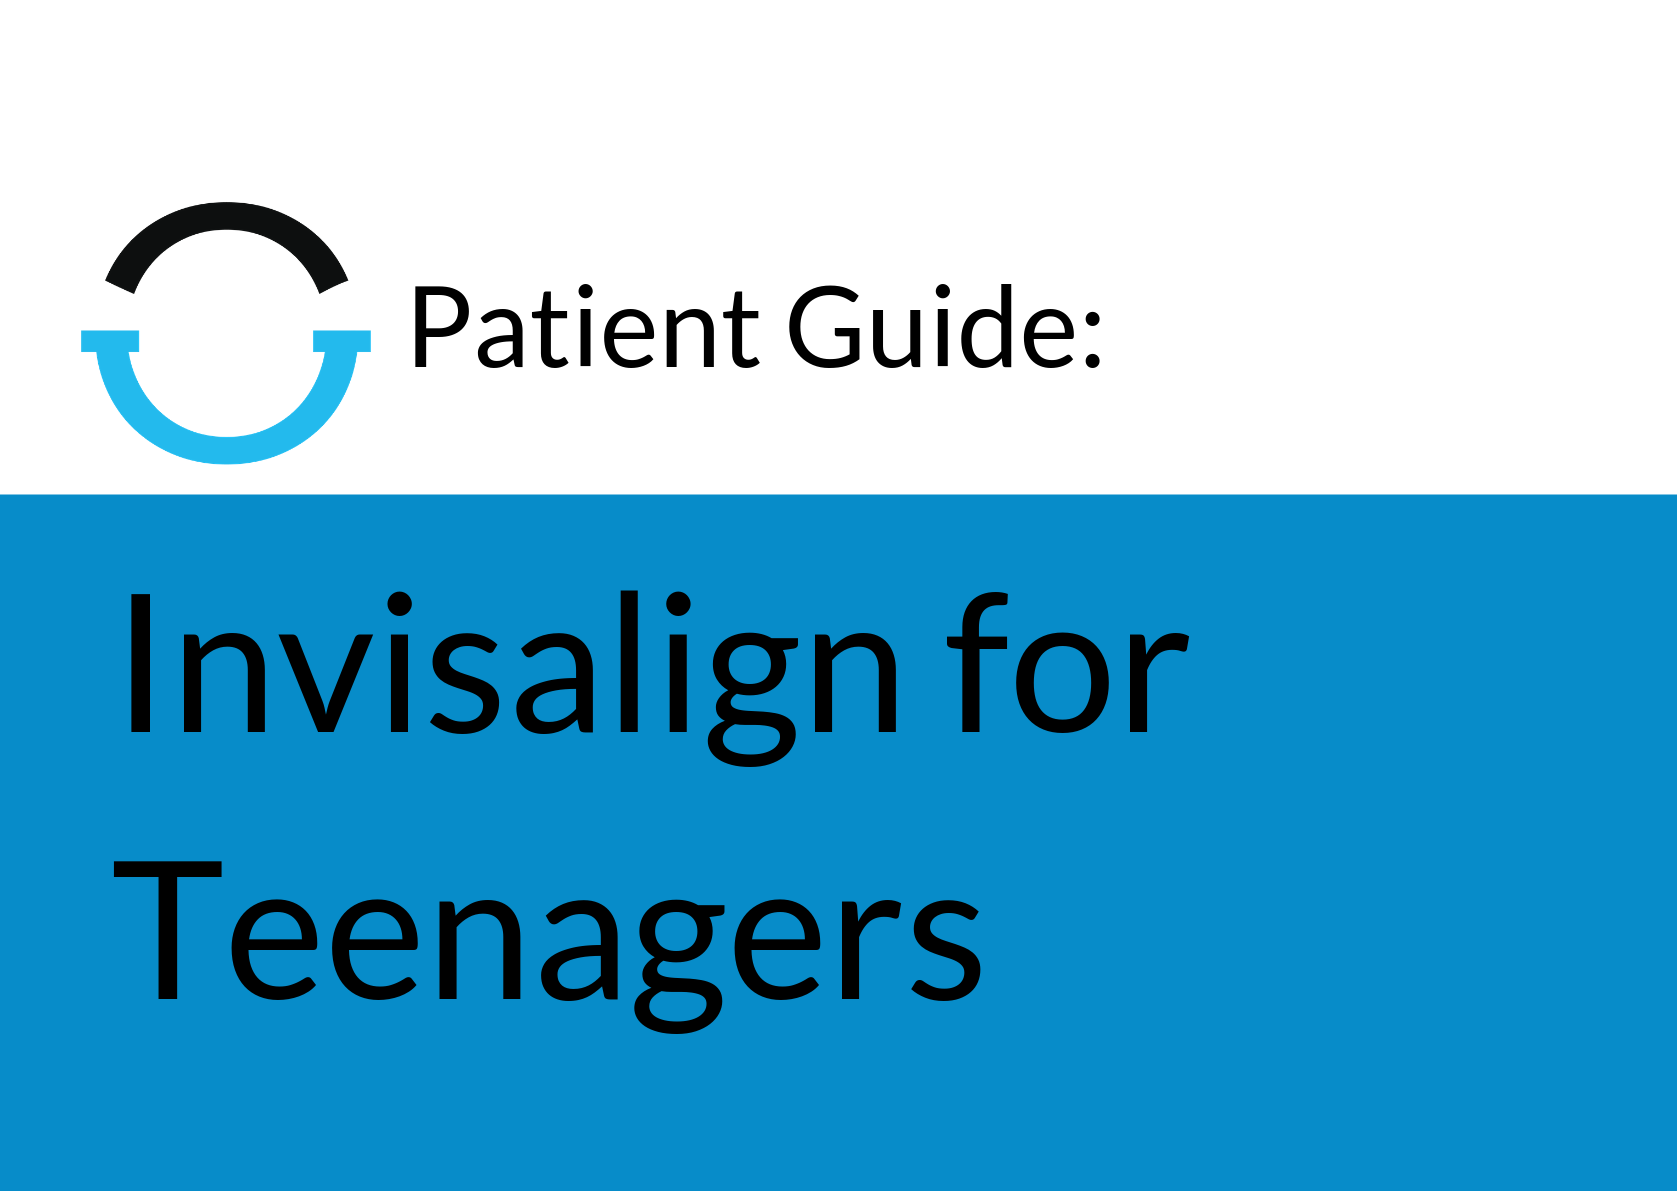 Patient Guide Header Image – Invisalign for Teenagers LARGE